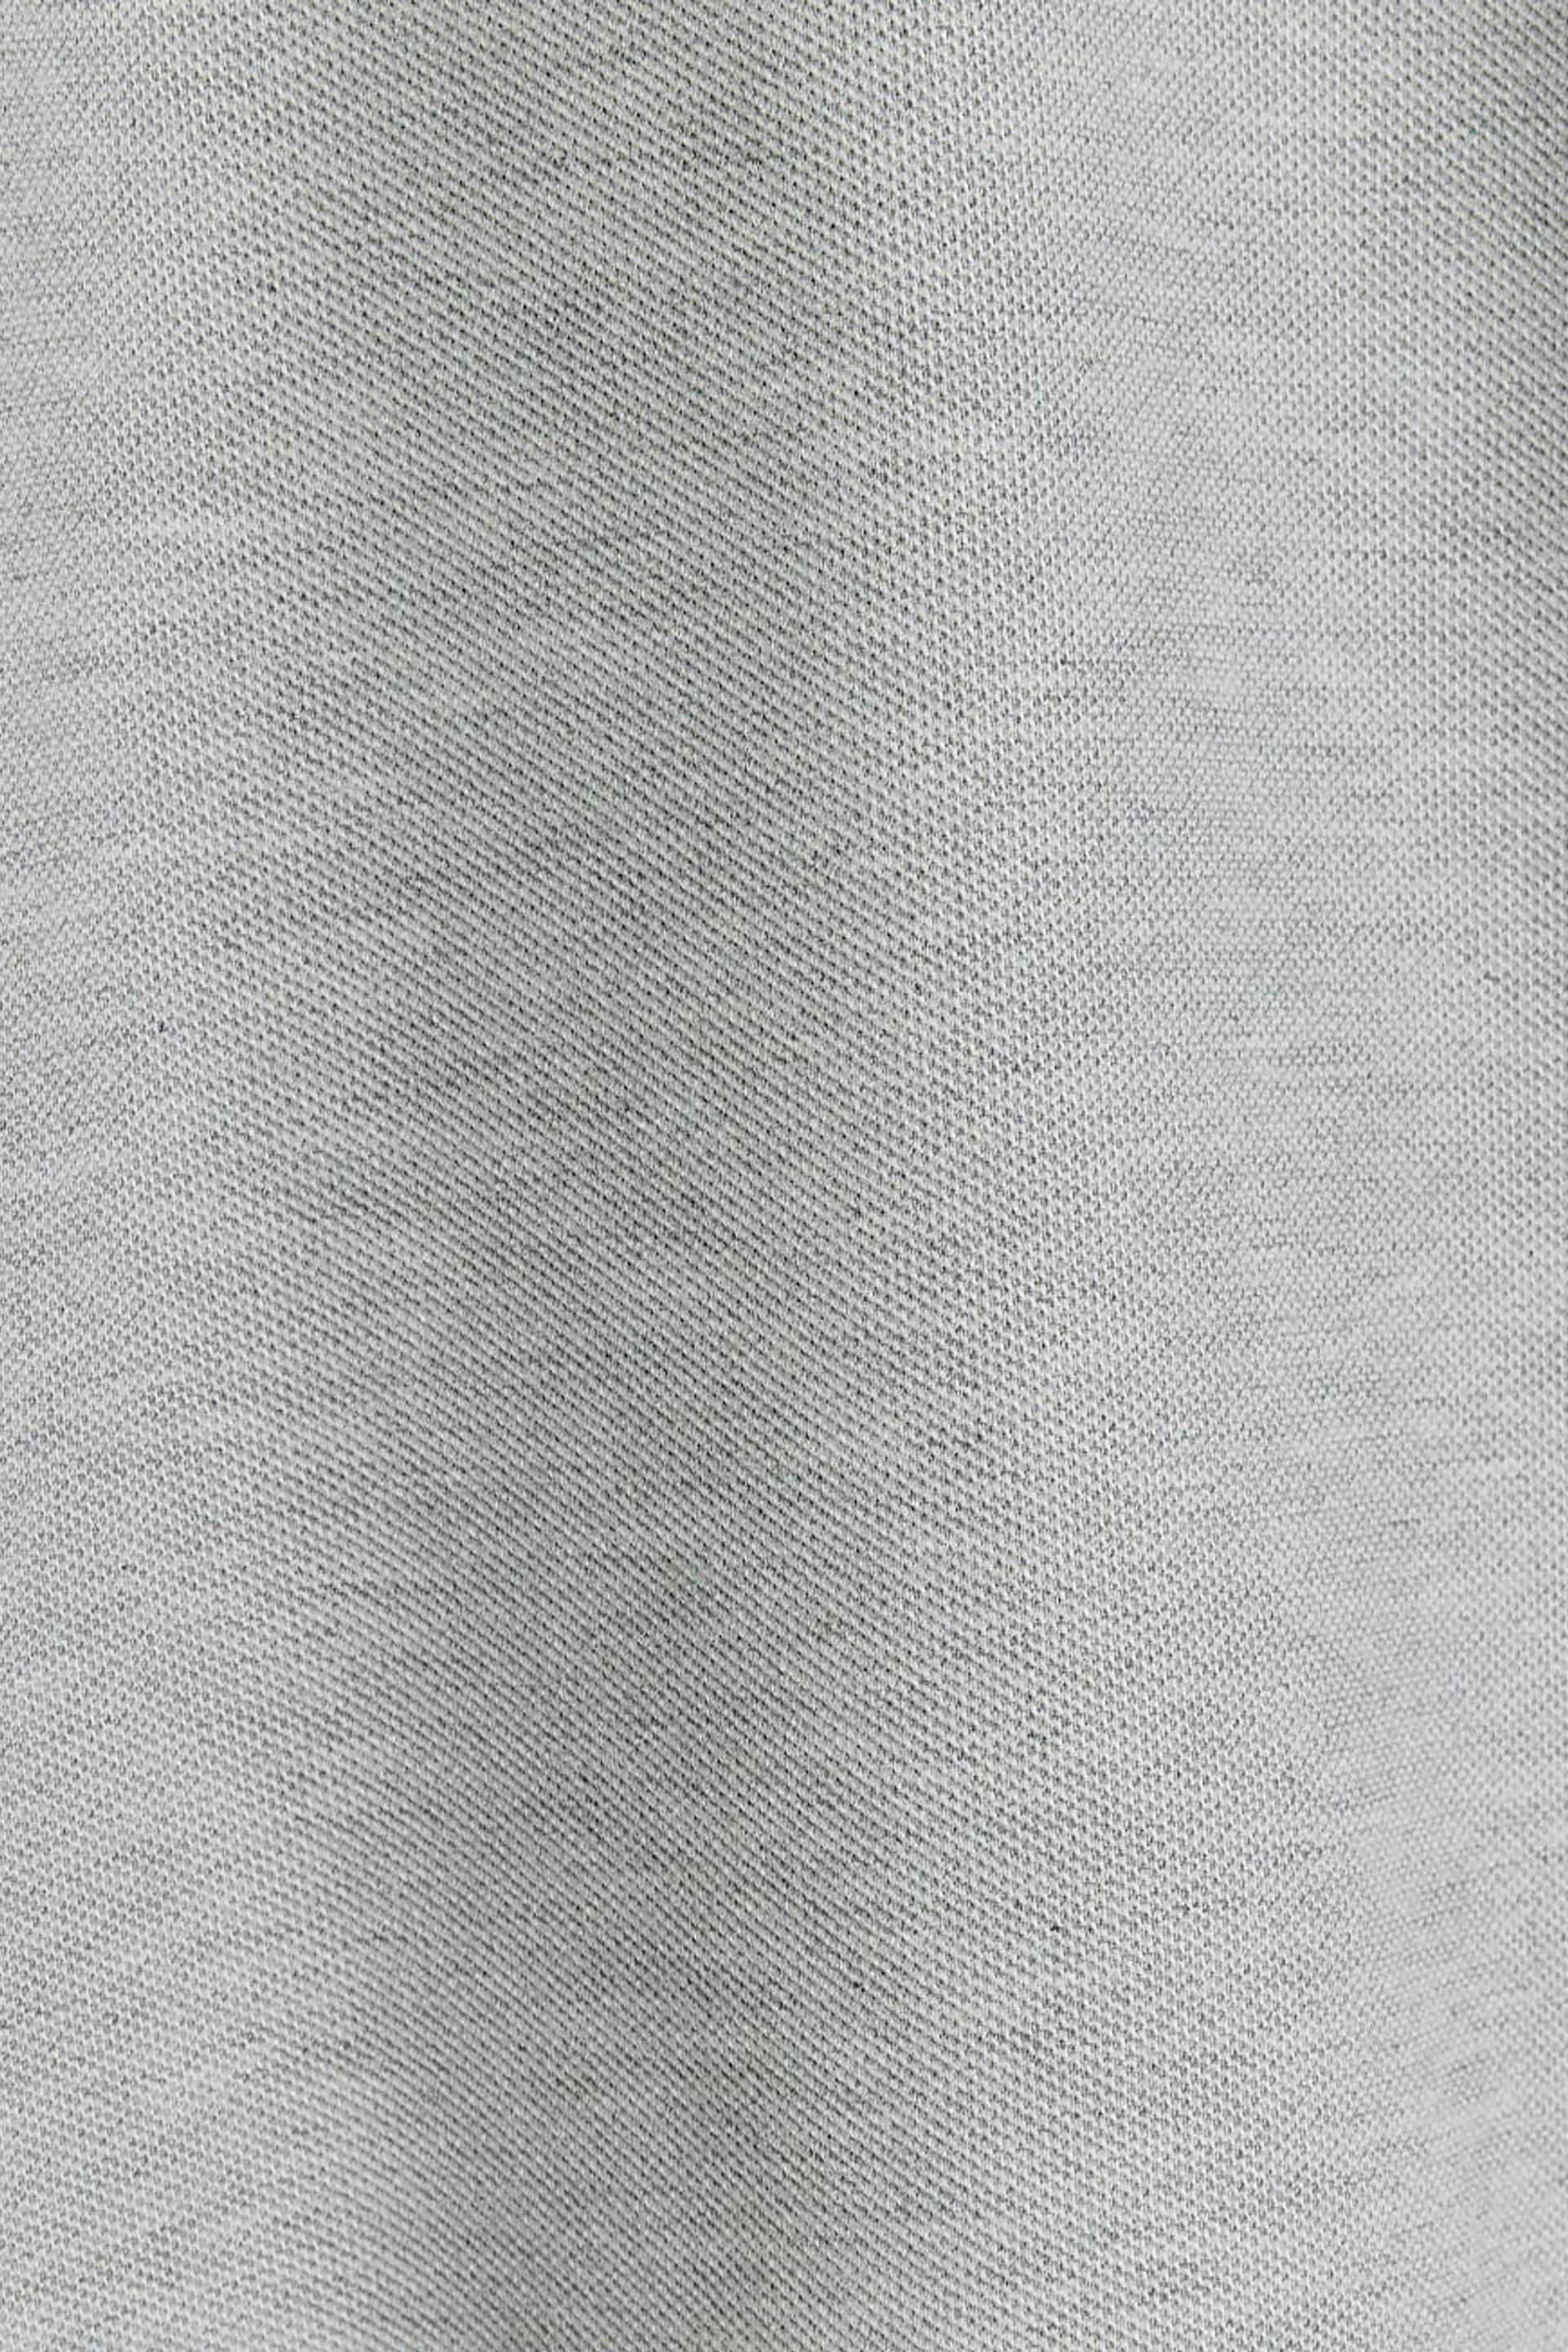 River Island Grey Slim Fit Textured Funnel Neck Sweat Shirt - Image 6 of 6